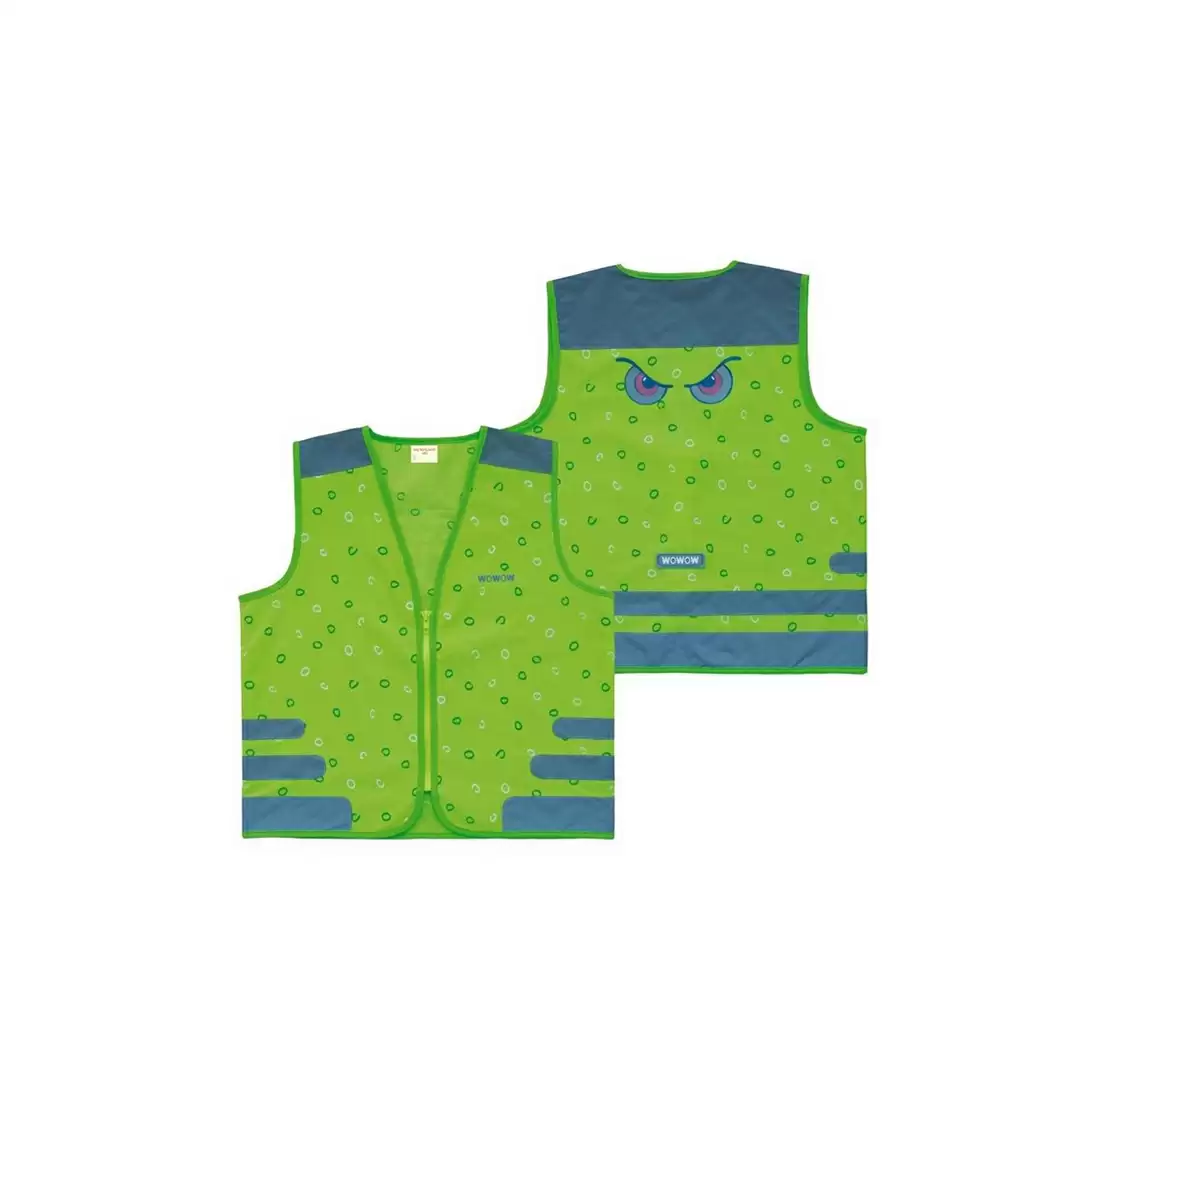 Nutty green safety vest for children S - image